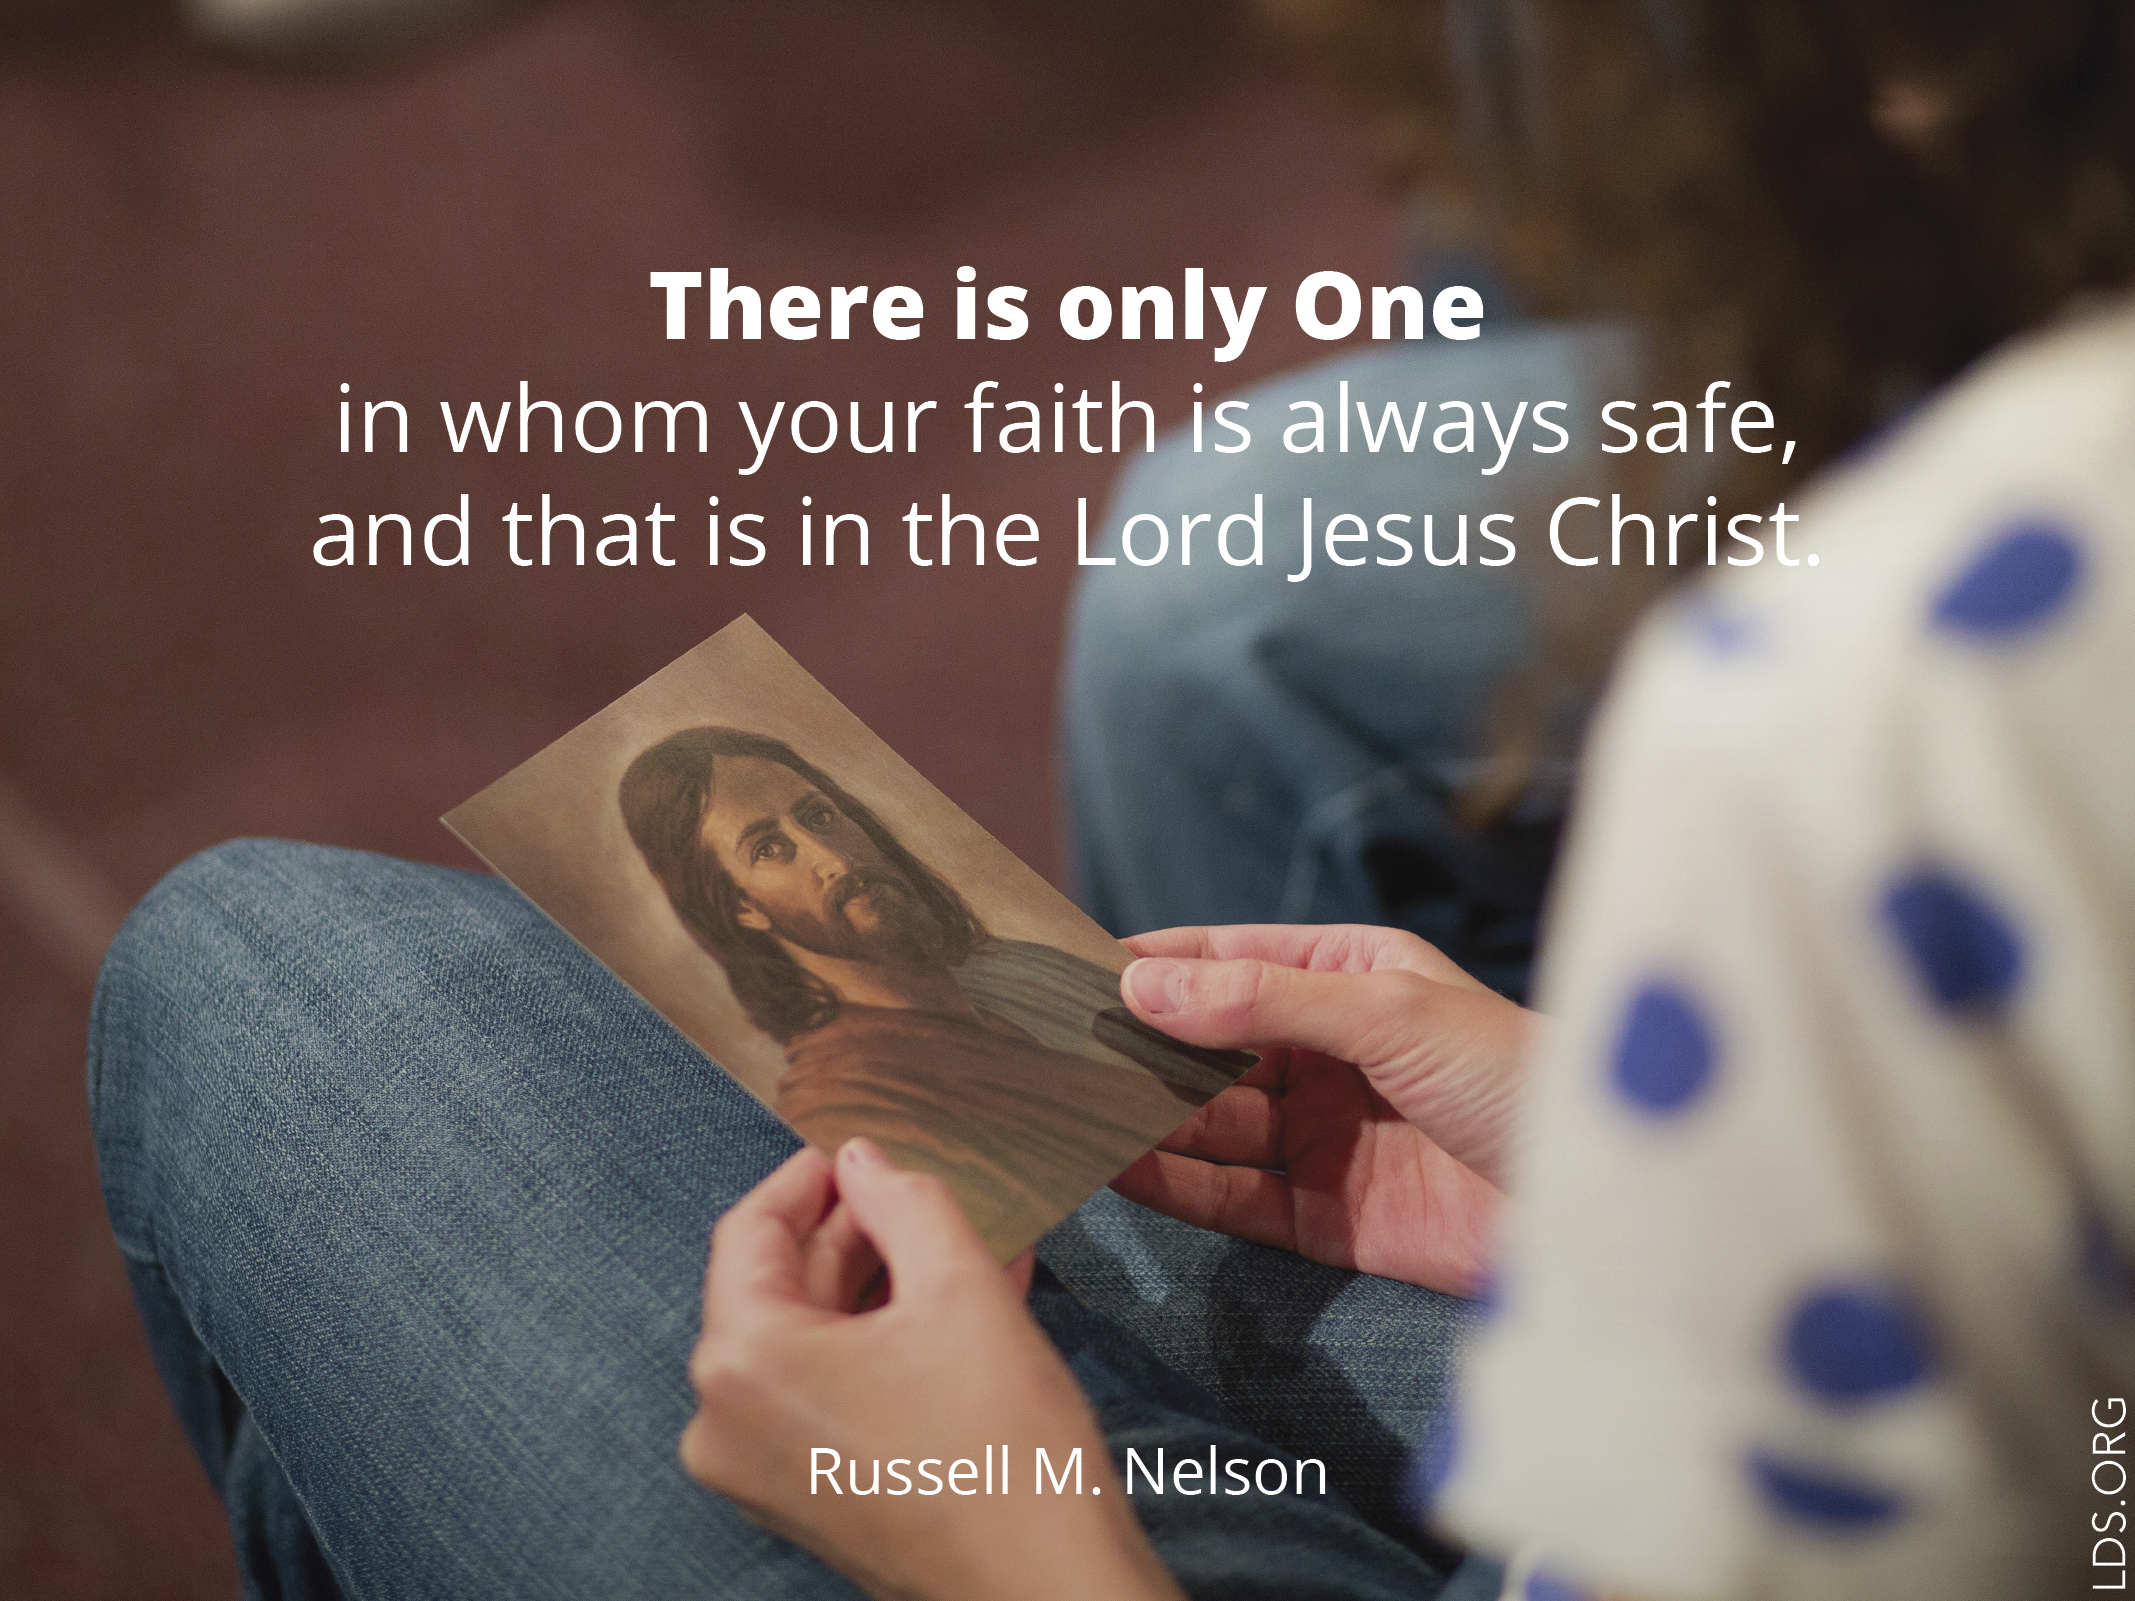 “There is only One in whom your faith is always safe, and that is in the Lord Jesus Christ.”—President Russell M. Nelson, “Let Your Faith Show”